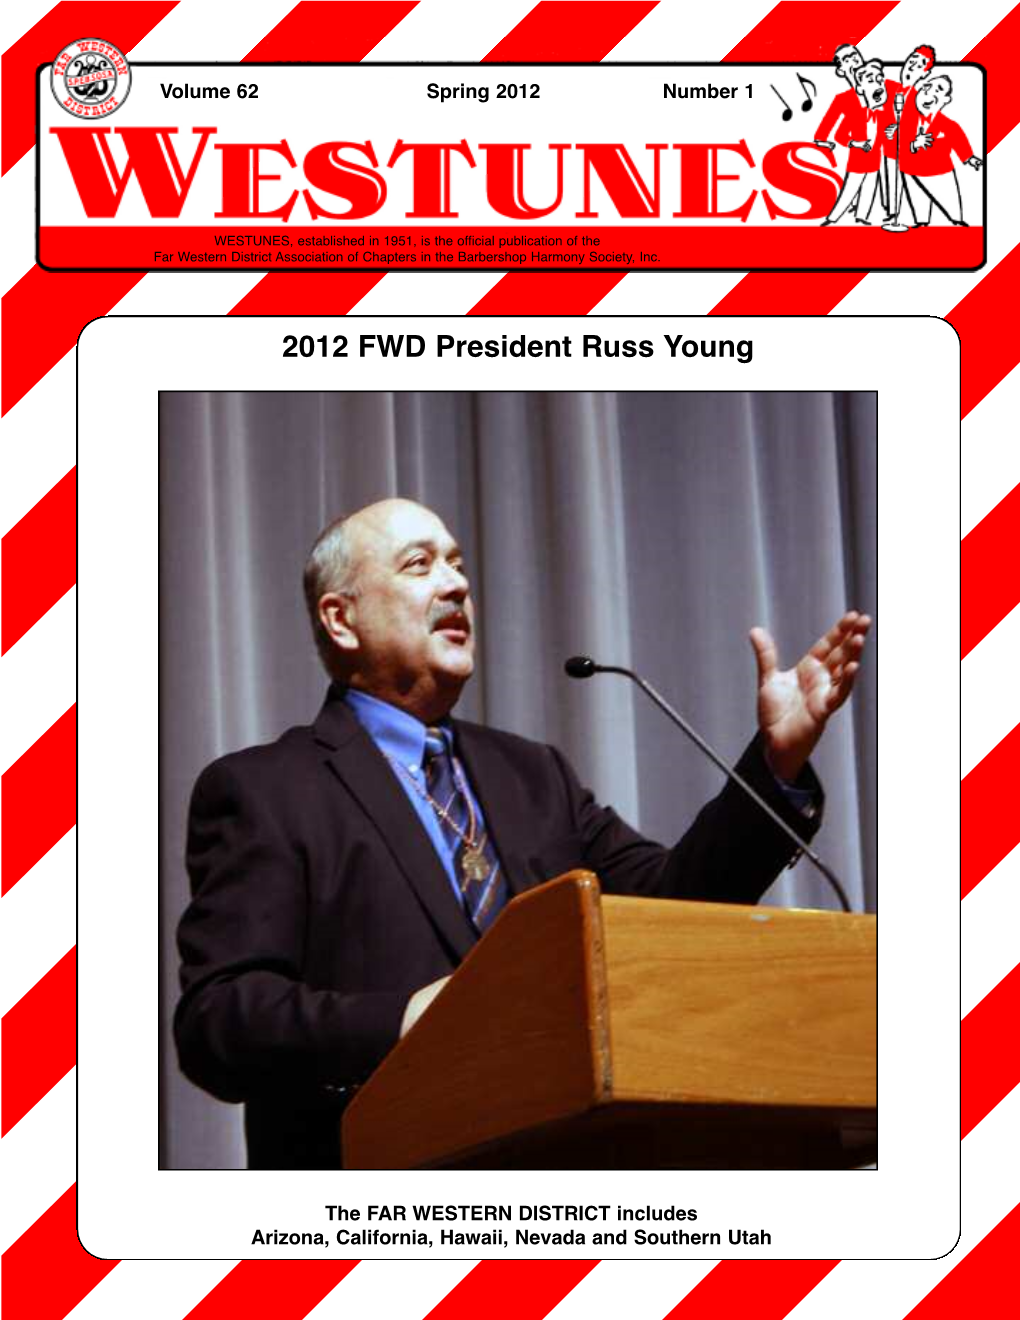 2012 FWD President Russ Young